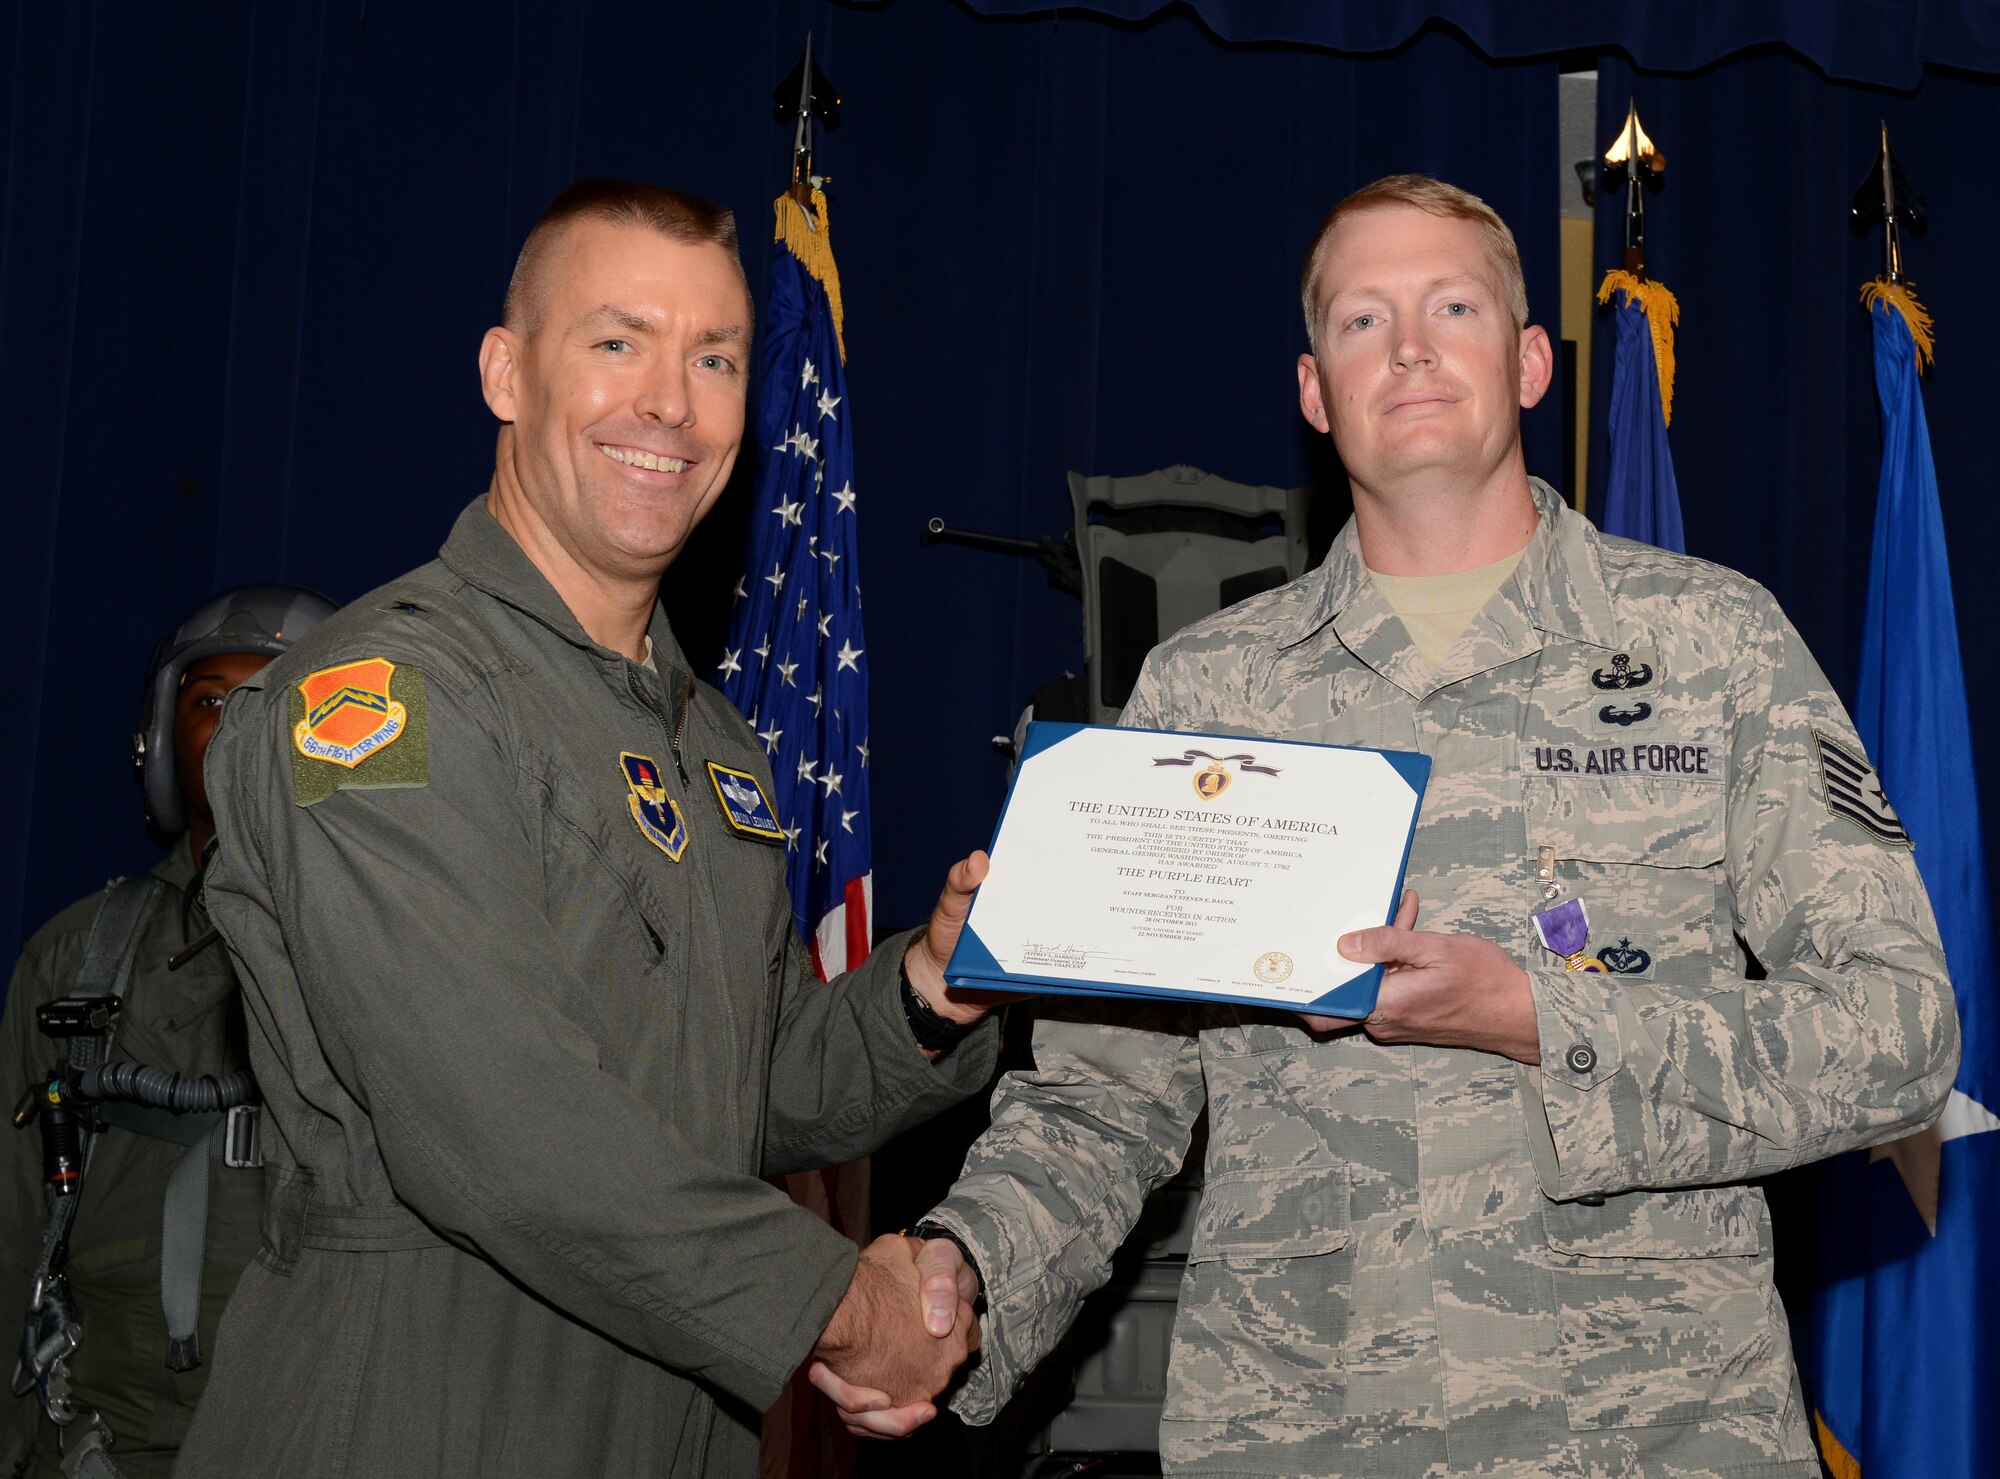 Tech. Sgt. Steven Dauck, 56th Civil Engineer Squadron explosive ordinance disposal team leader, receives the Purple Heart Medal from Brig. Gen. Brooke Leonard, 56th Fighter Wing commander, Nov. 30, 2016, at Luke Air Force Base, Ariz. Dauck received his Purple Heart for his actions during a route clearance patrol where he was hit by an improvised explosive device in Afghanistan, Oct. 28, 2011. (U.S. Air Force photo by Airman 1st Class Alexander Cook)  